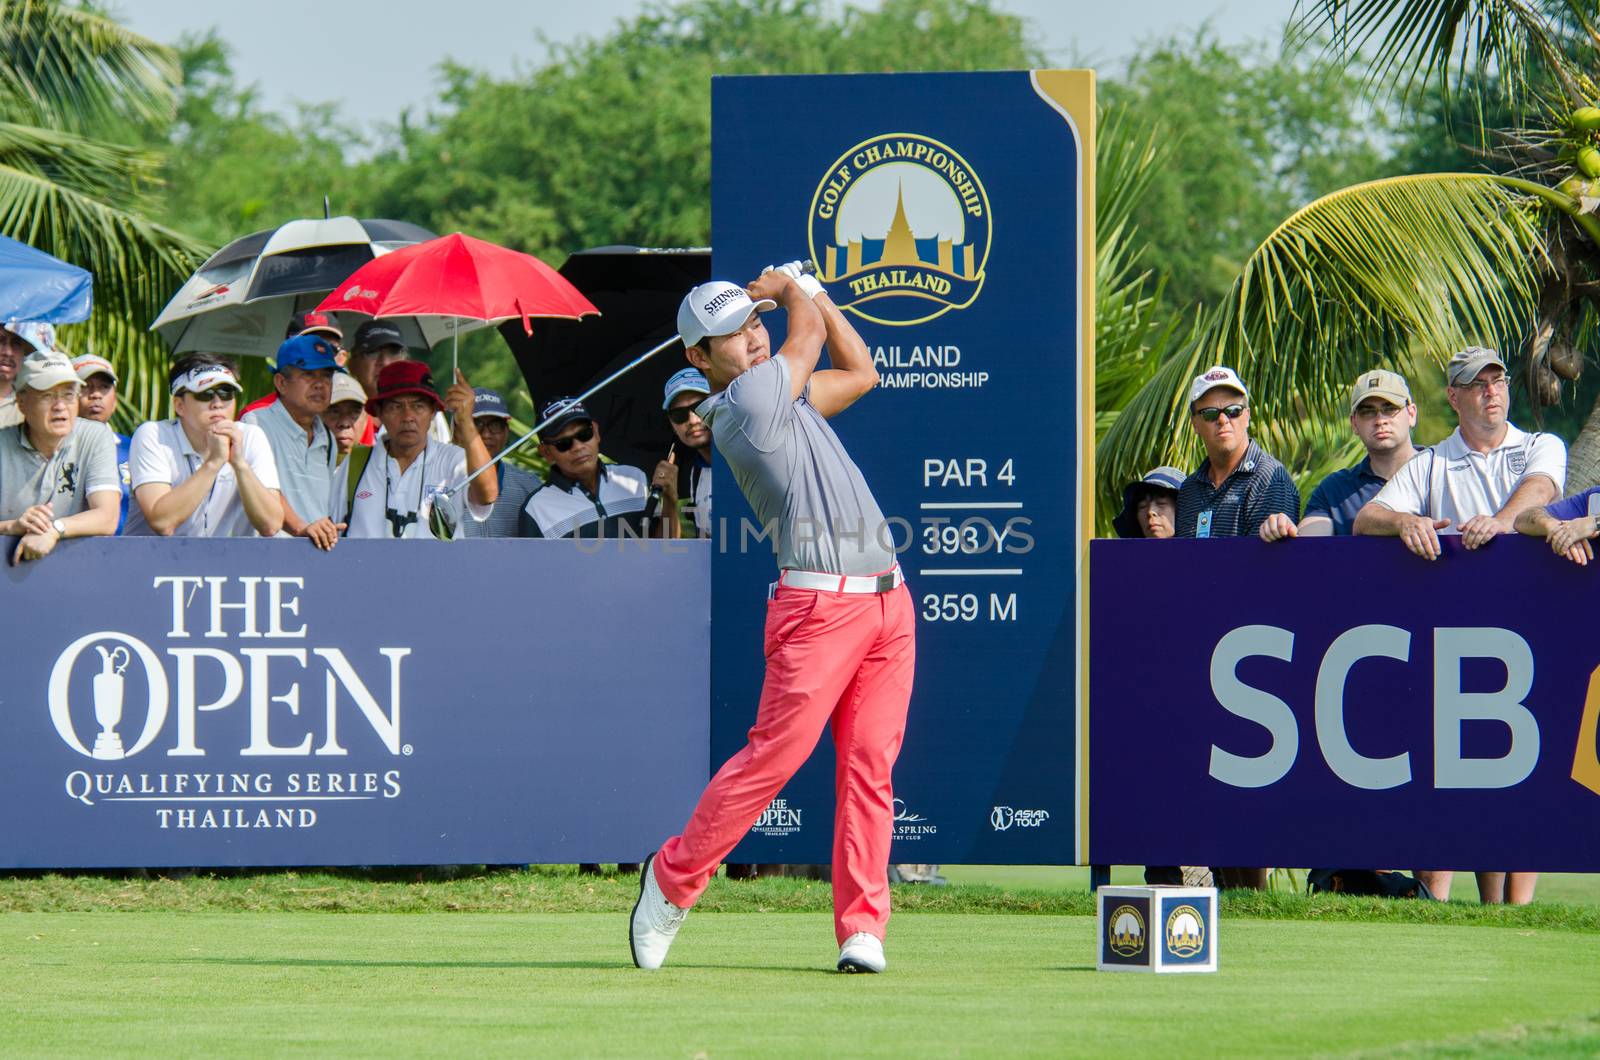 Sunghoon Kang in Thailand Golf Championship 2015 by chatchai